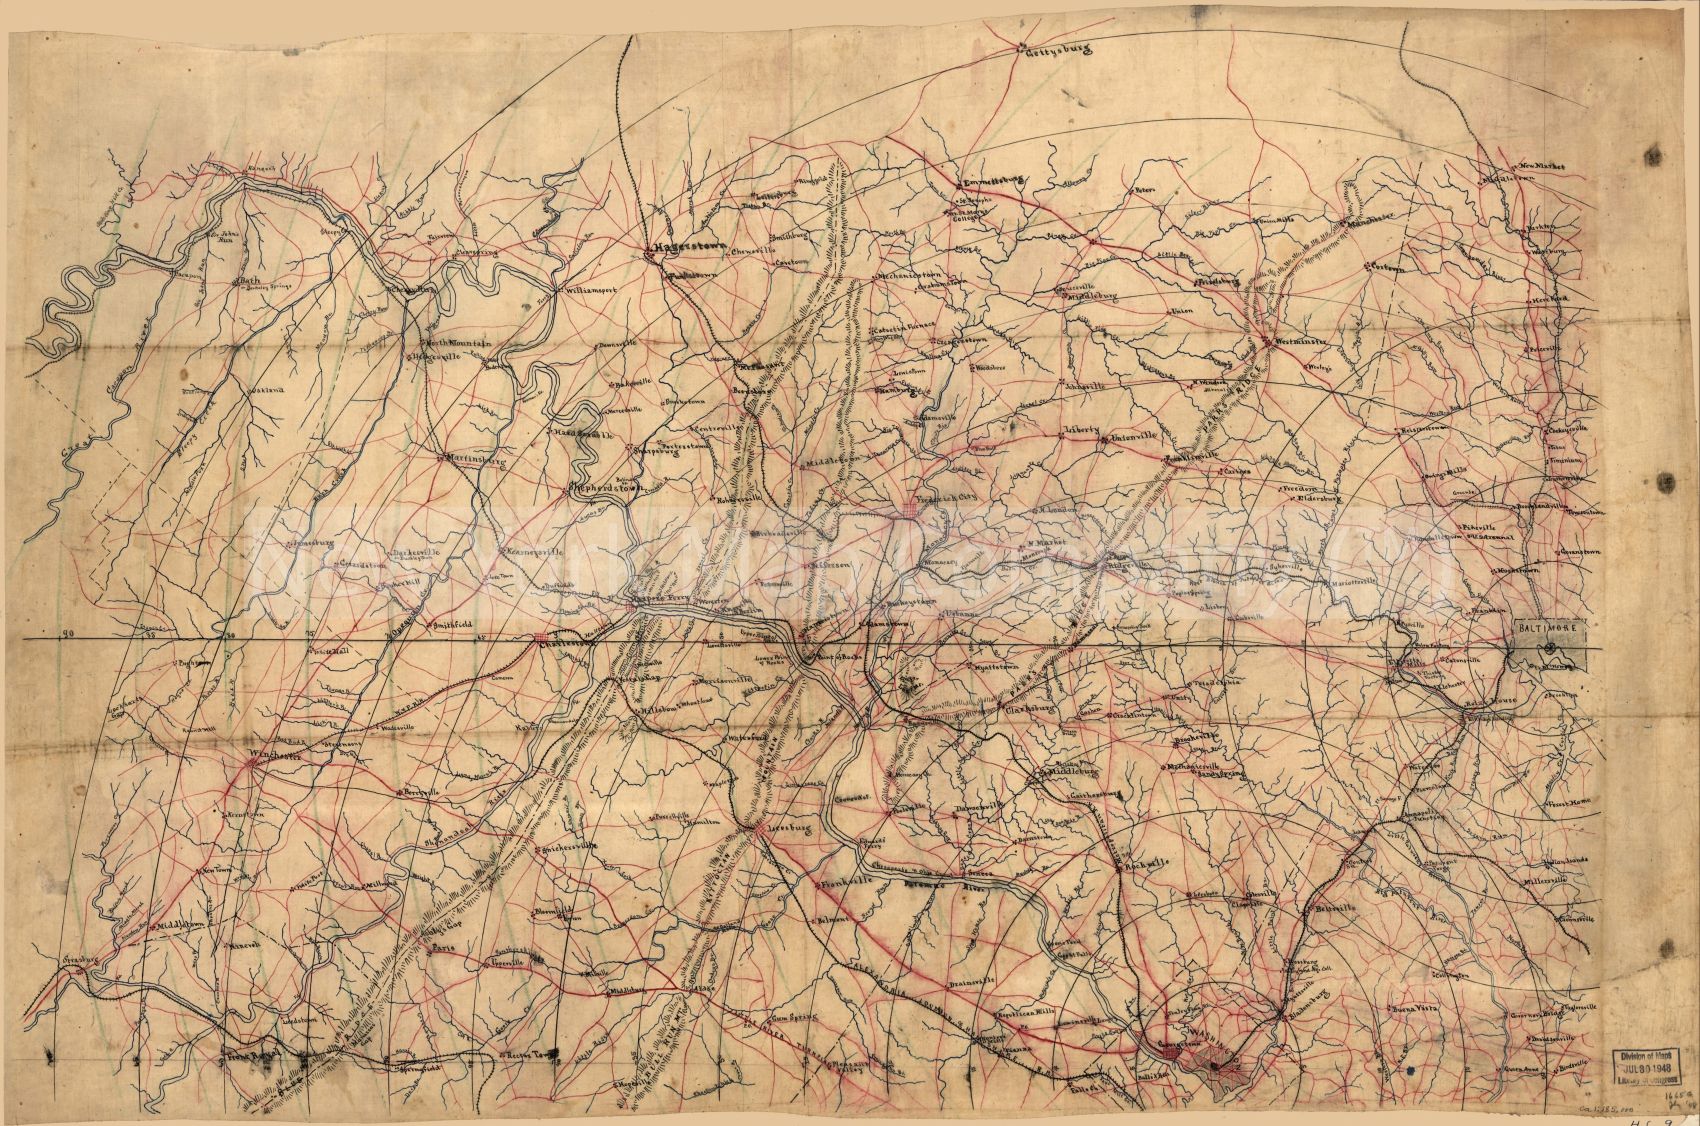 Map of portions of Virginia and Maryland, extending from Baltimore to Strasburg, and from Washington to Gettysburg, with concentric circles at 5-mile intervals centering on Washington and on Baltimore. Description Date and title from Stephenson's Civil